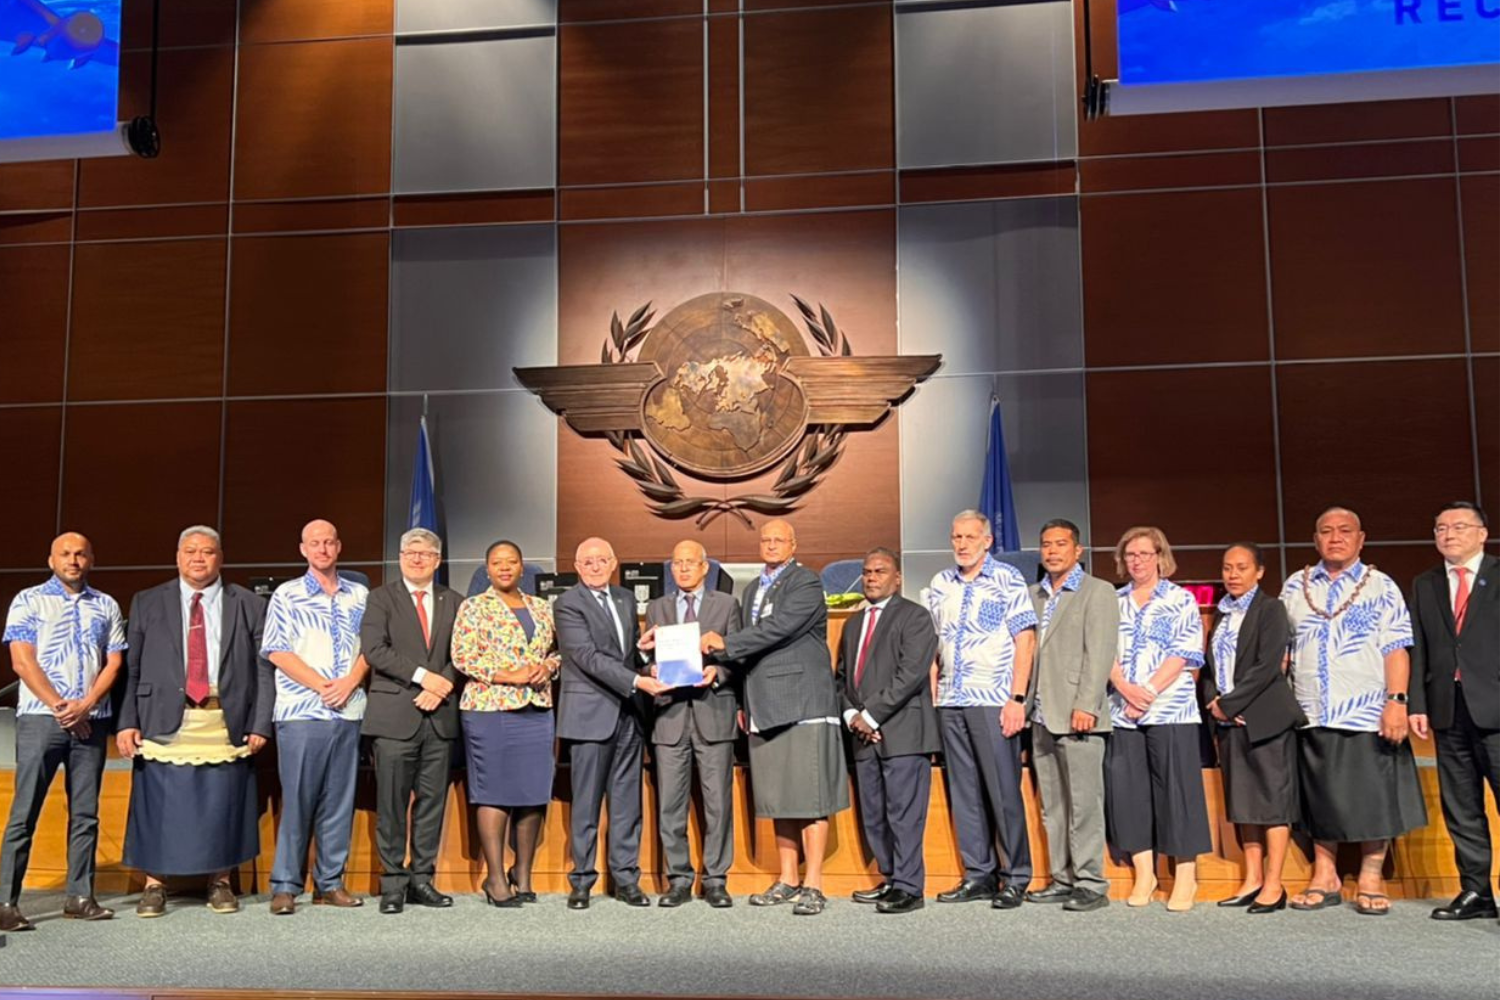 The Papua New Guinea Minister for Transport and Civil Aviation, the Honourable Walter D. Schnaubelt, MP, launched the Pacific Regional Aviation Strategy at the ICAO 41st Assembly with Pacific Island officials and dignitaries, the President of the Assembly Poppy Khoza, ICAO Council President Salvatore Sciacchitano, and ICAO Secretary General Juan Carlos Salazar. Credit: paso.aero